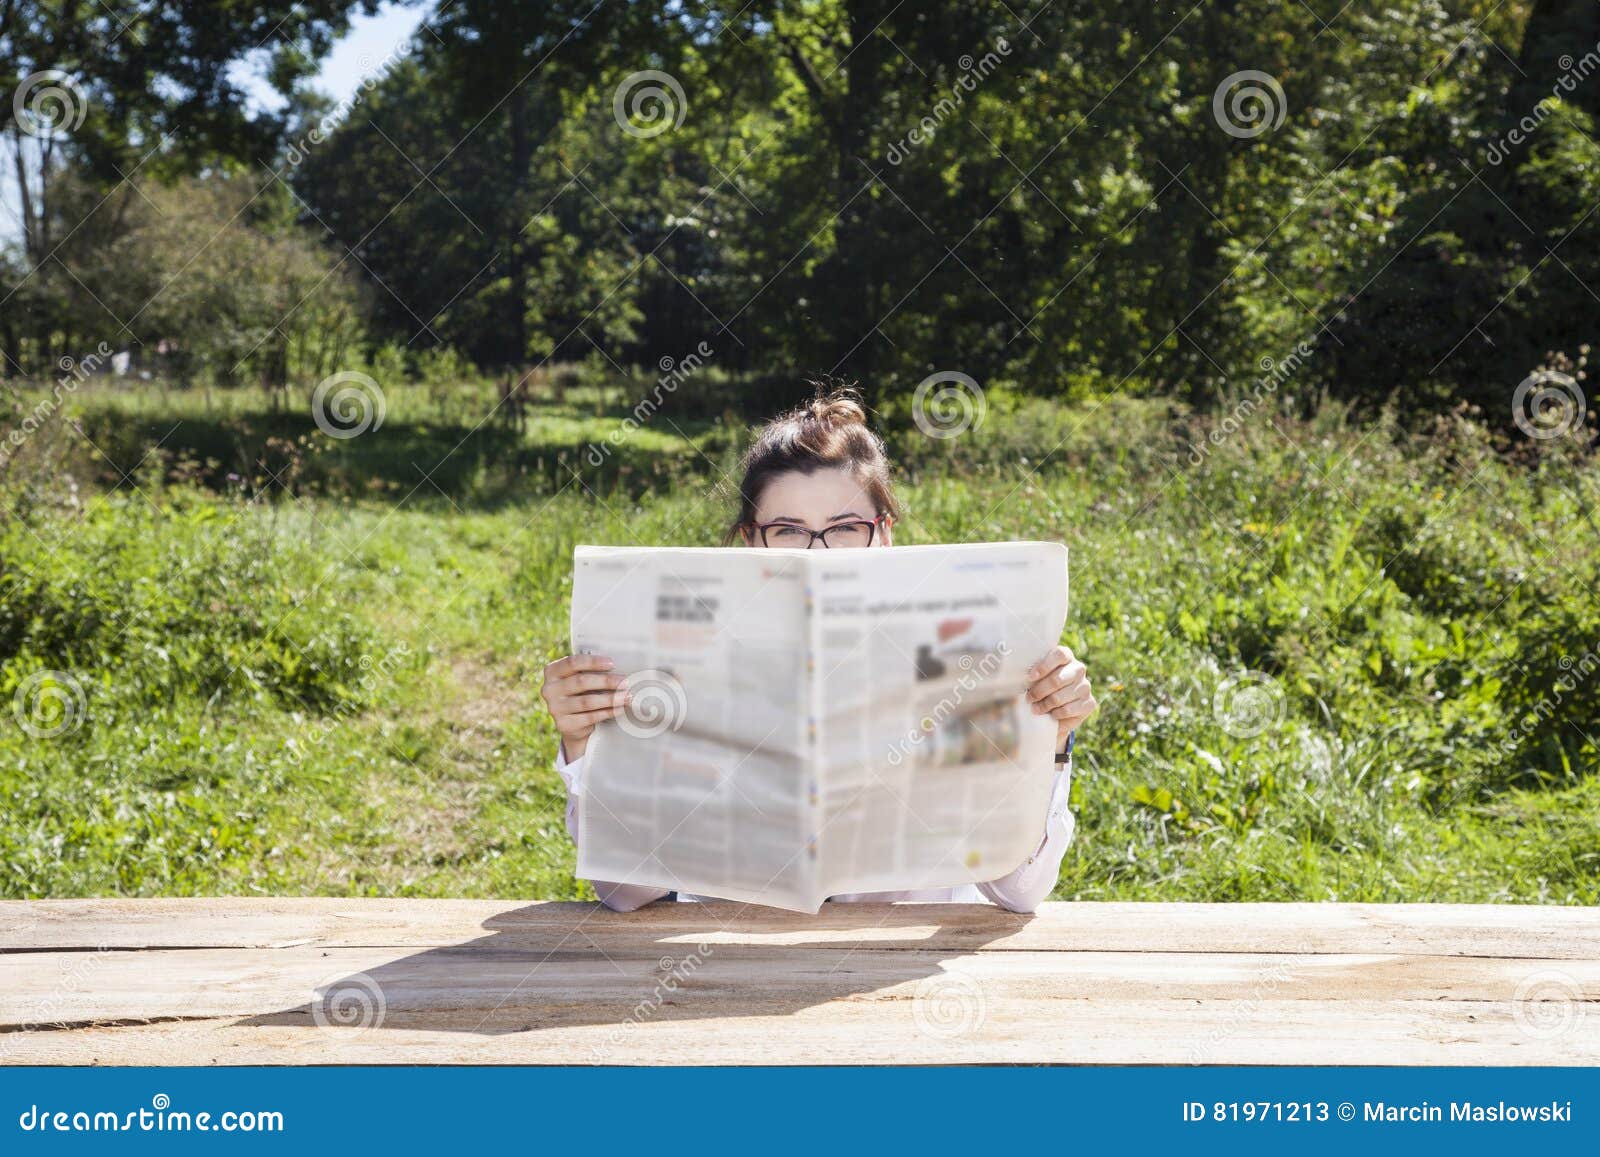 eyes protrude a newspaper